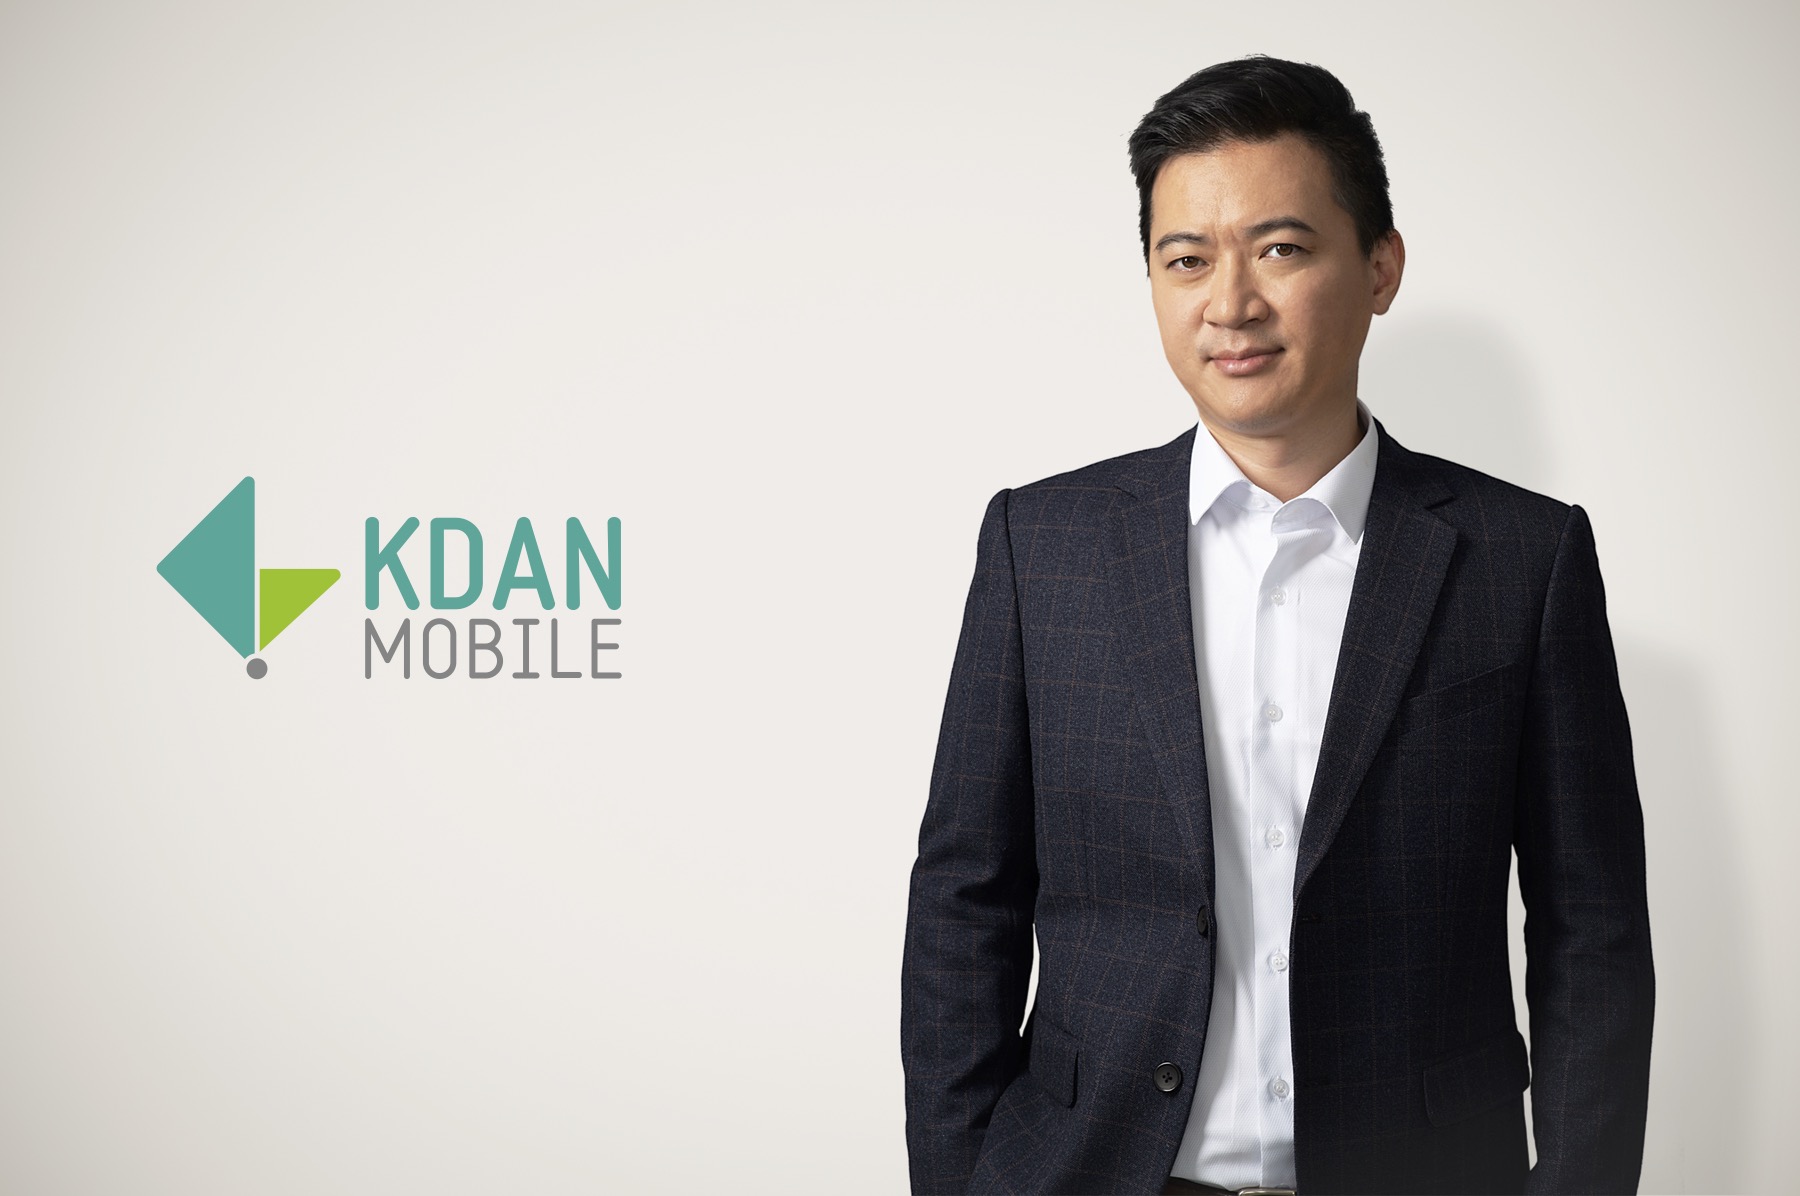 Kdan Mobile founder and CEO Kenny Su